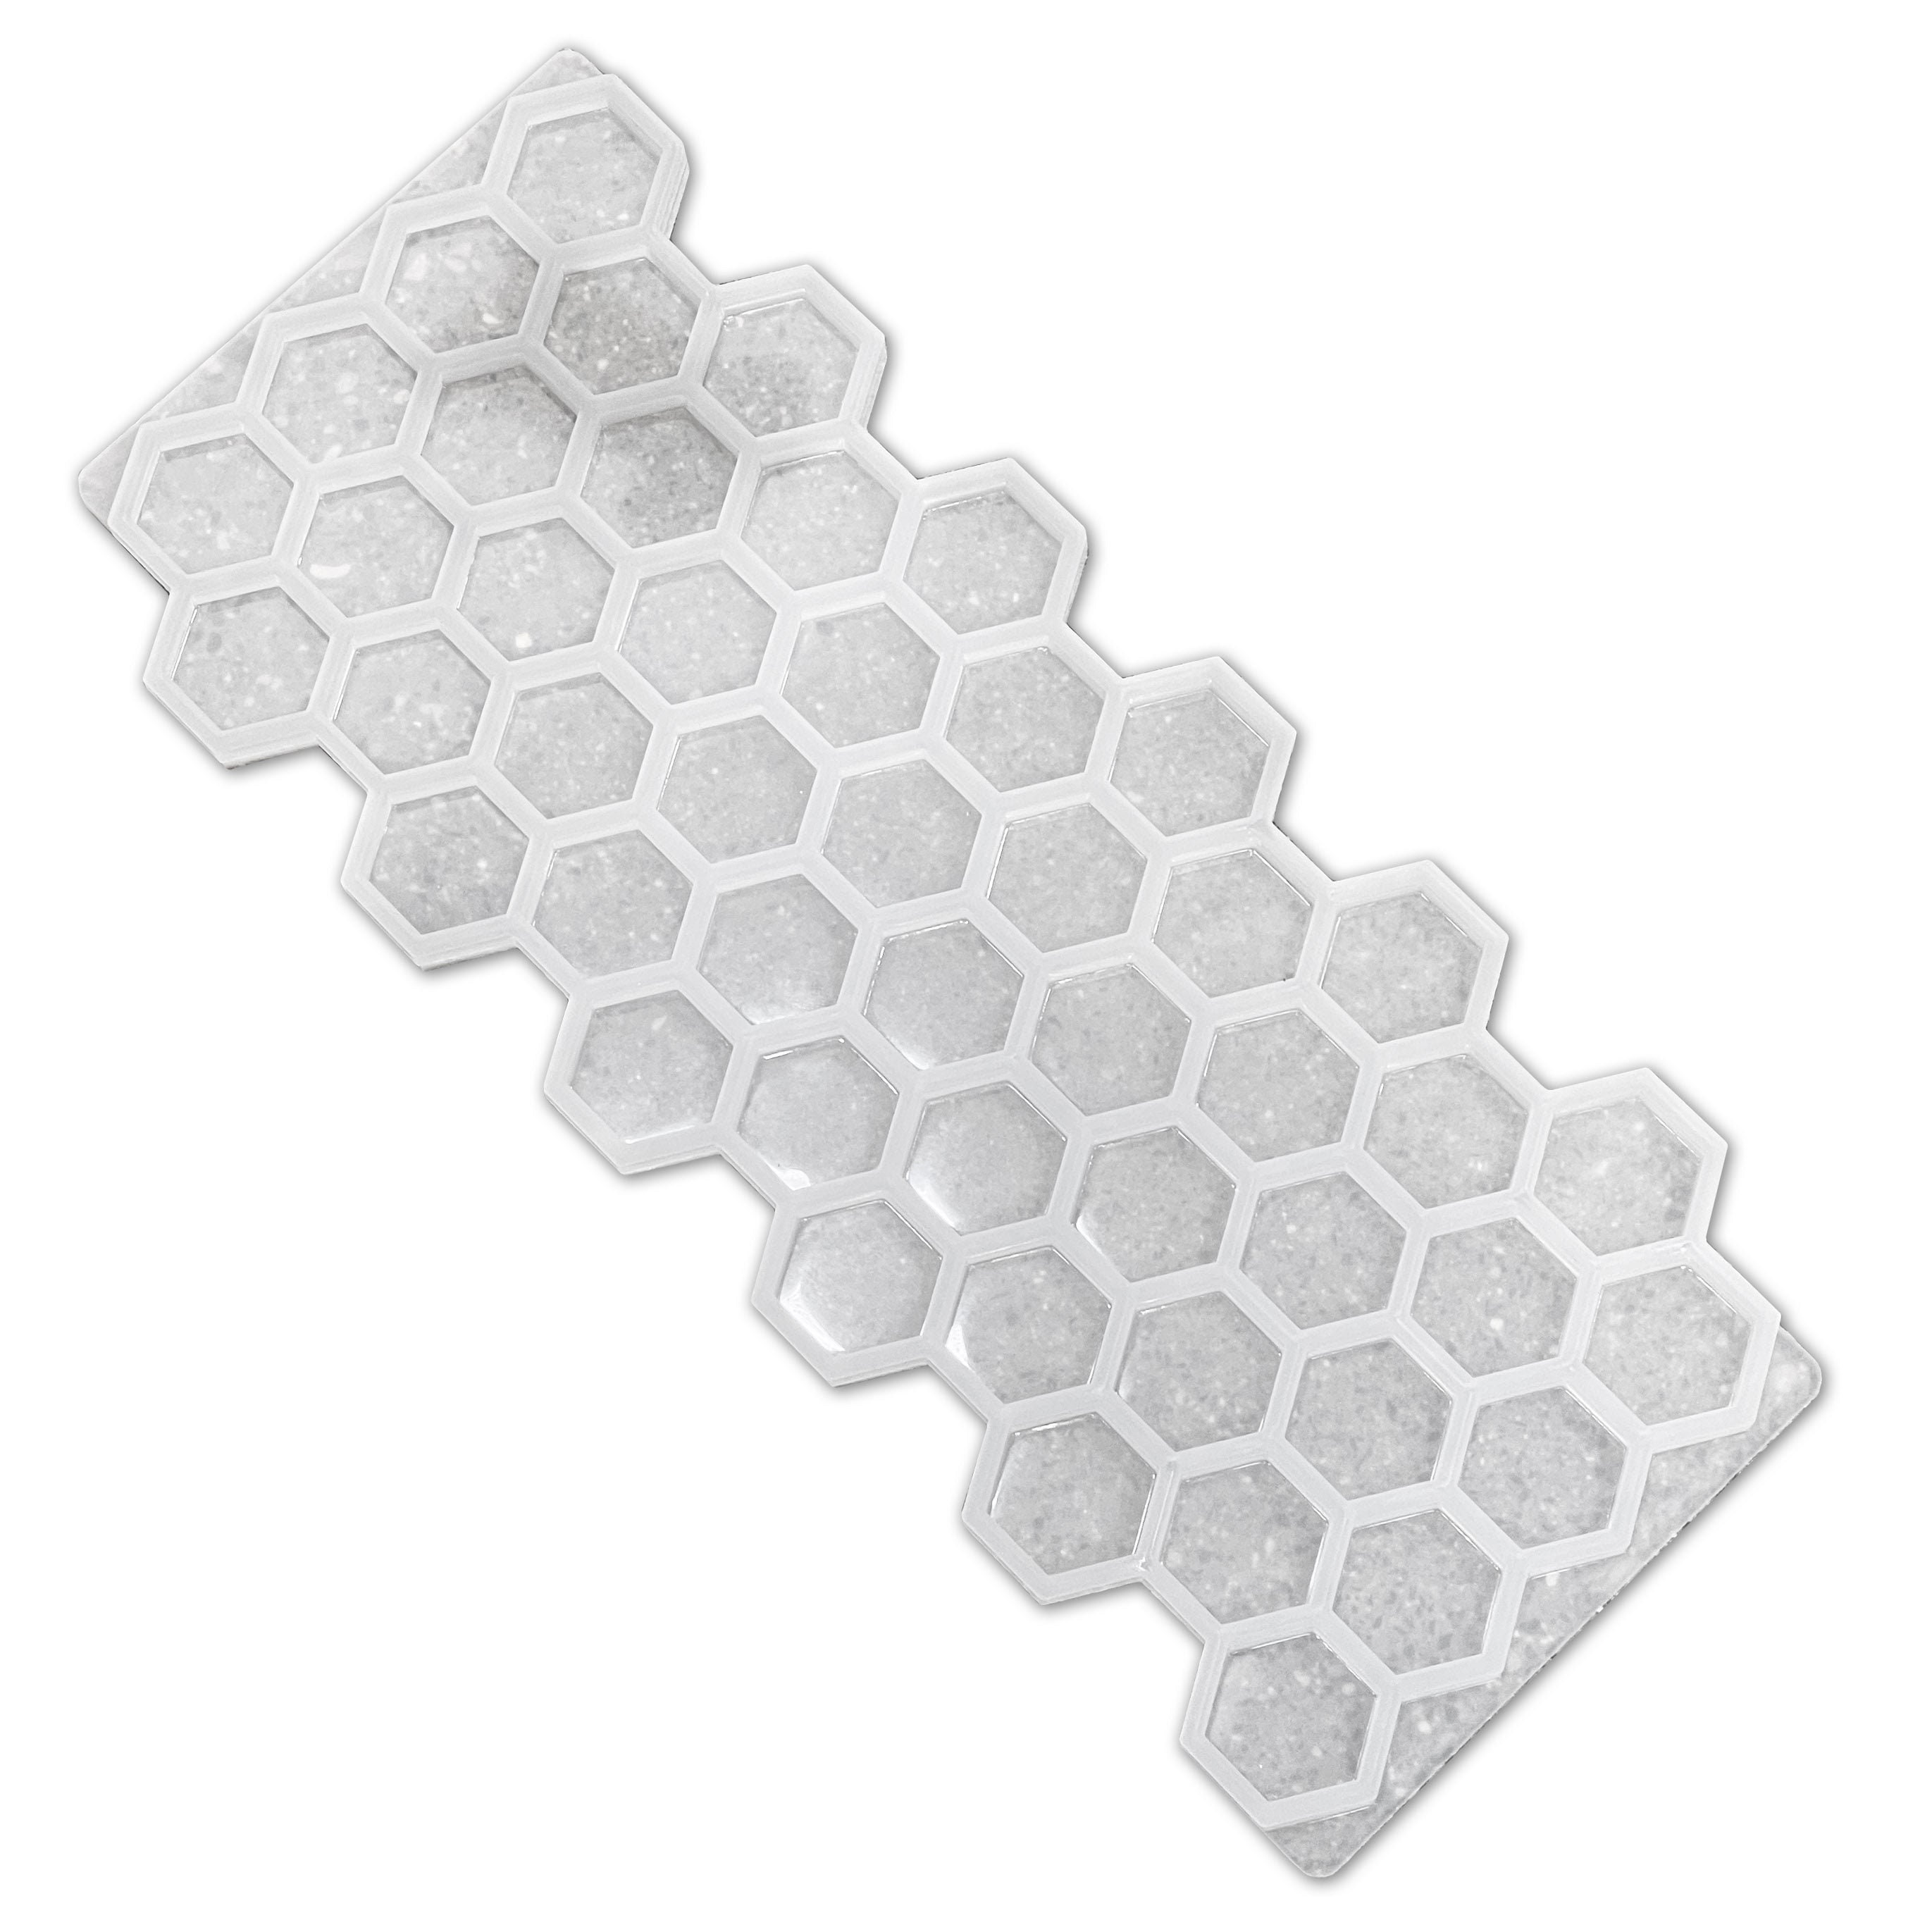 8x8x2 Deep Tray Silicone Mold for Epoxy Resin - 1 Deep Dish Mold